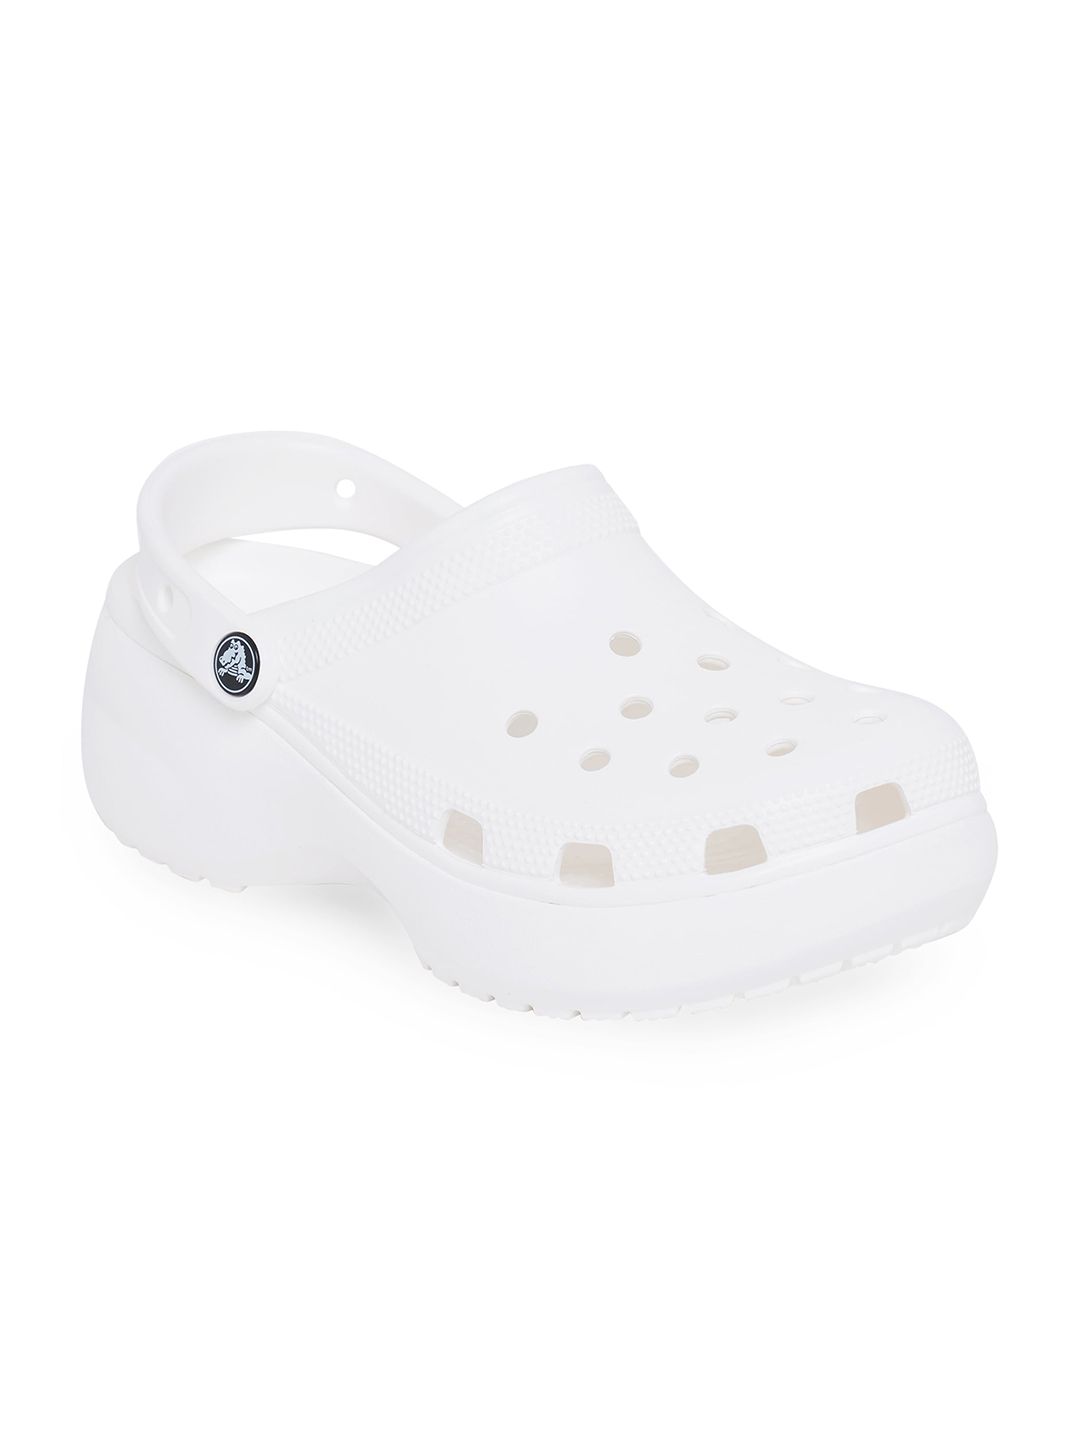 Crocs Classic  Women White Solid Clogs Price in India